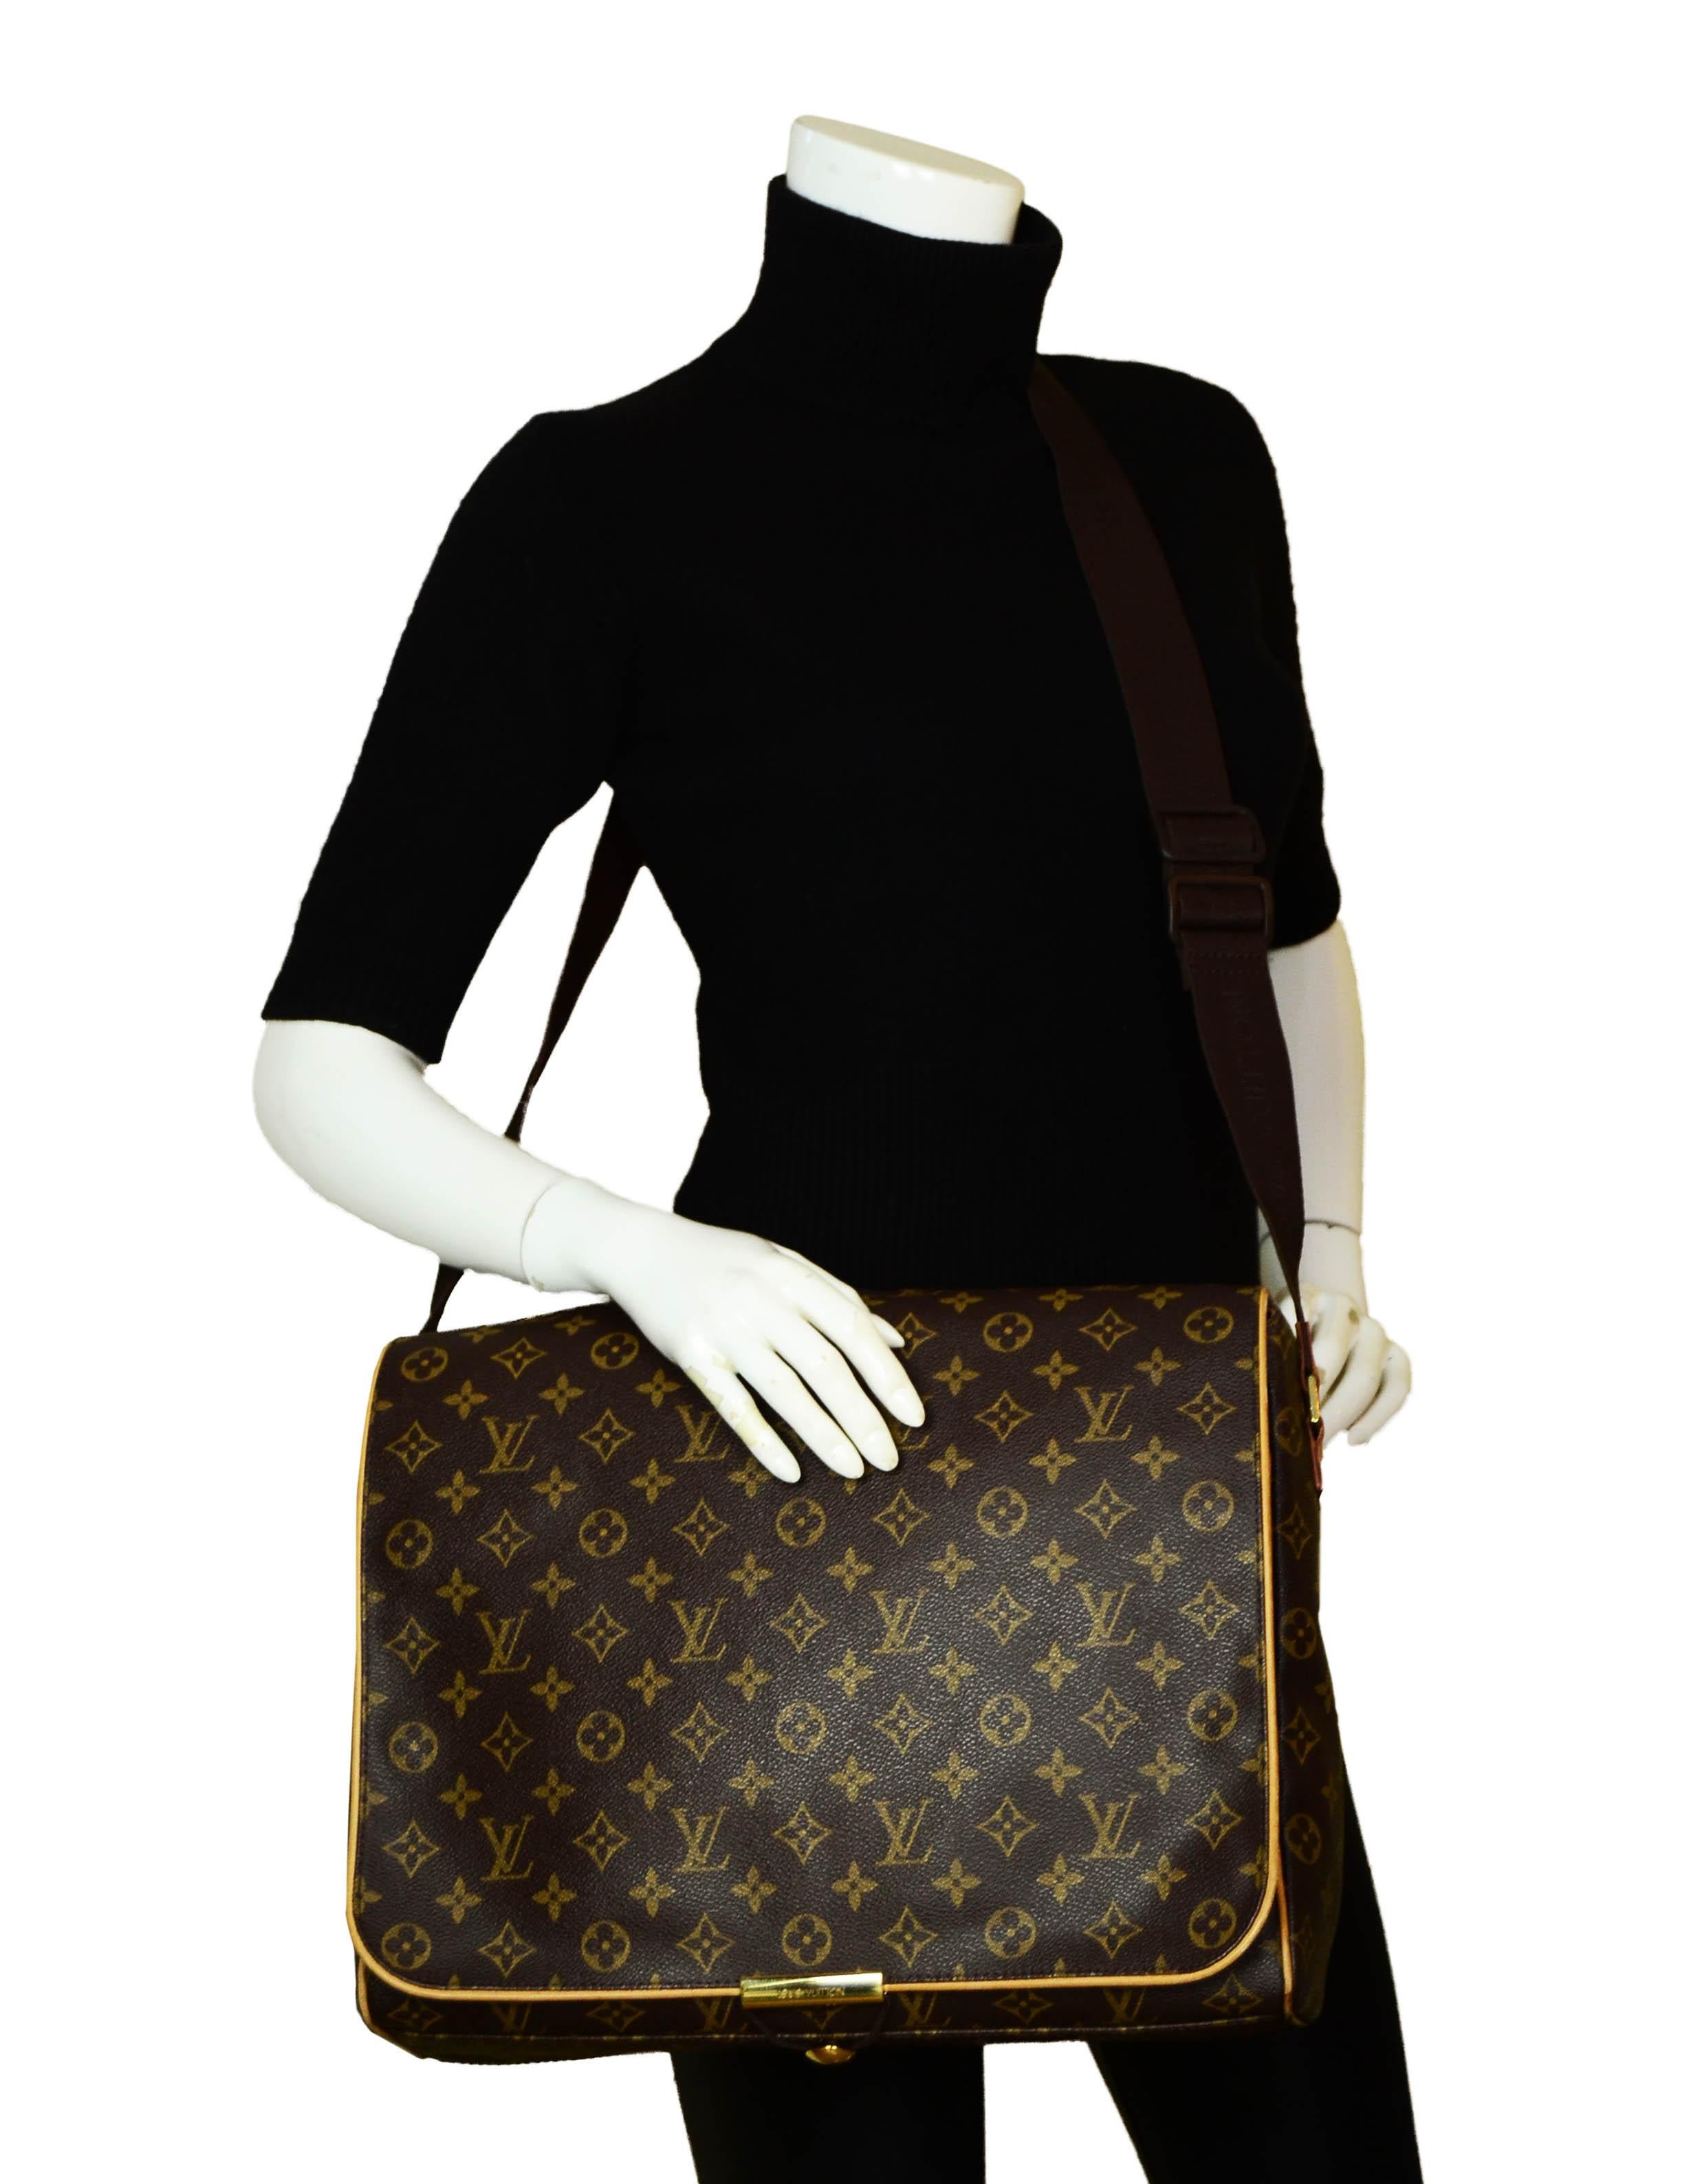 Louis Vuitton Monogram Abbesses Messenger Bag.  Features back leather piece to slide onto rolling luggage.  

Made In: France
Year of Production: 2002
Color: Brown monogram
Hardware: Goldtone
Materials: Coated canvas
Lining: Canvas
Closure/Opening: